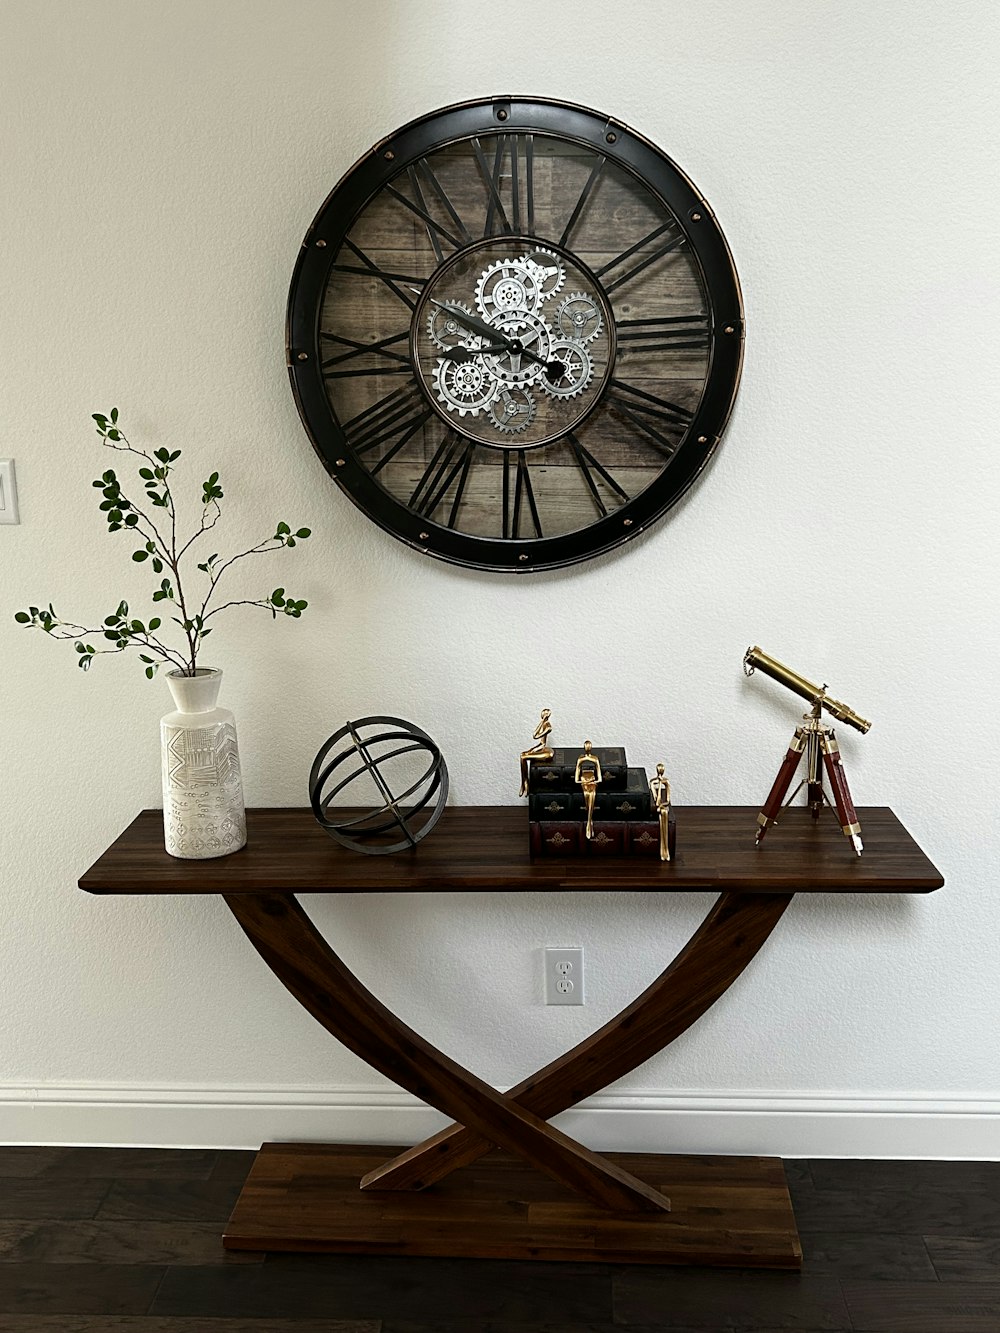 a wooden table with a clock on the wall